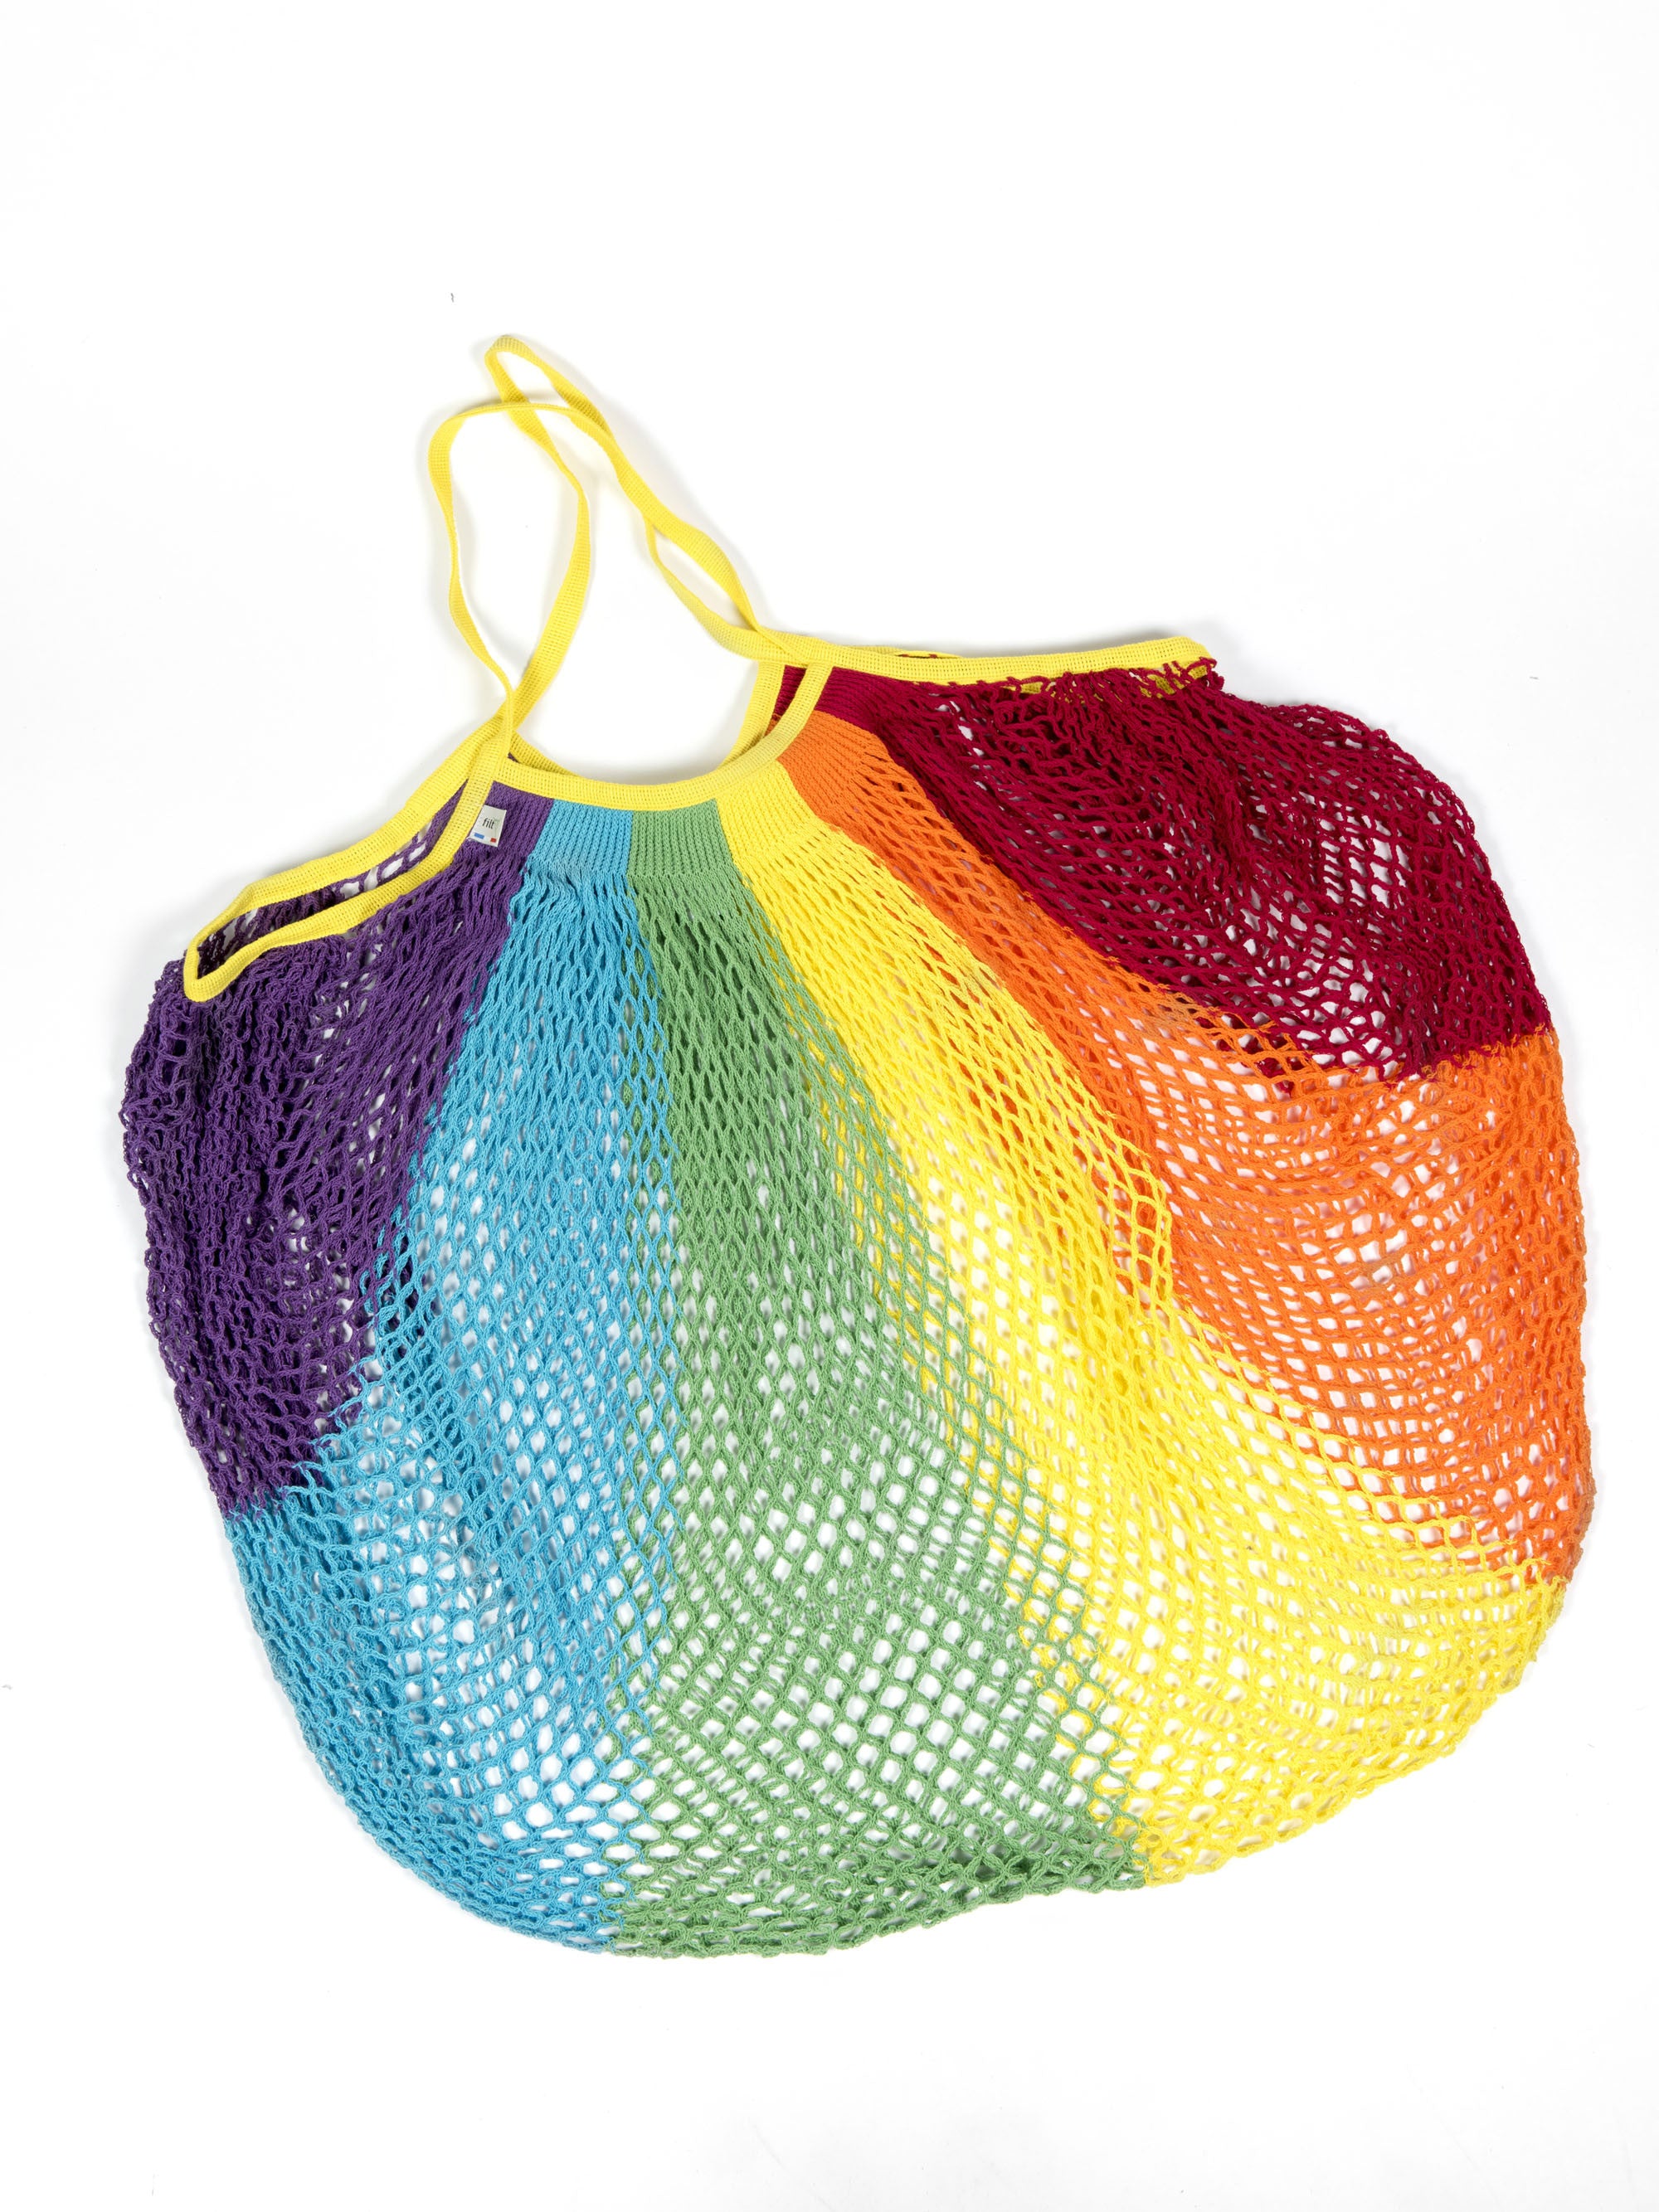 Filt Large Bag in Rainbow Bag Filt Bags Brand_Filt Shopping Bags Textiles_Shoppers 2200-230RBLg_Large_Rainbow_A